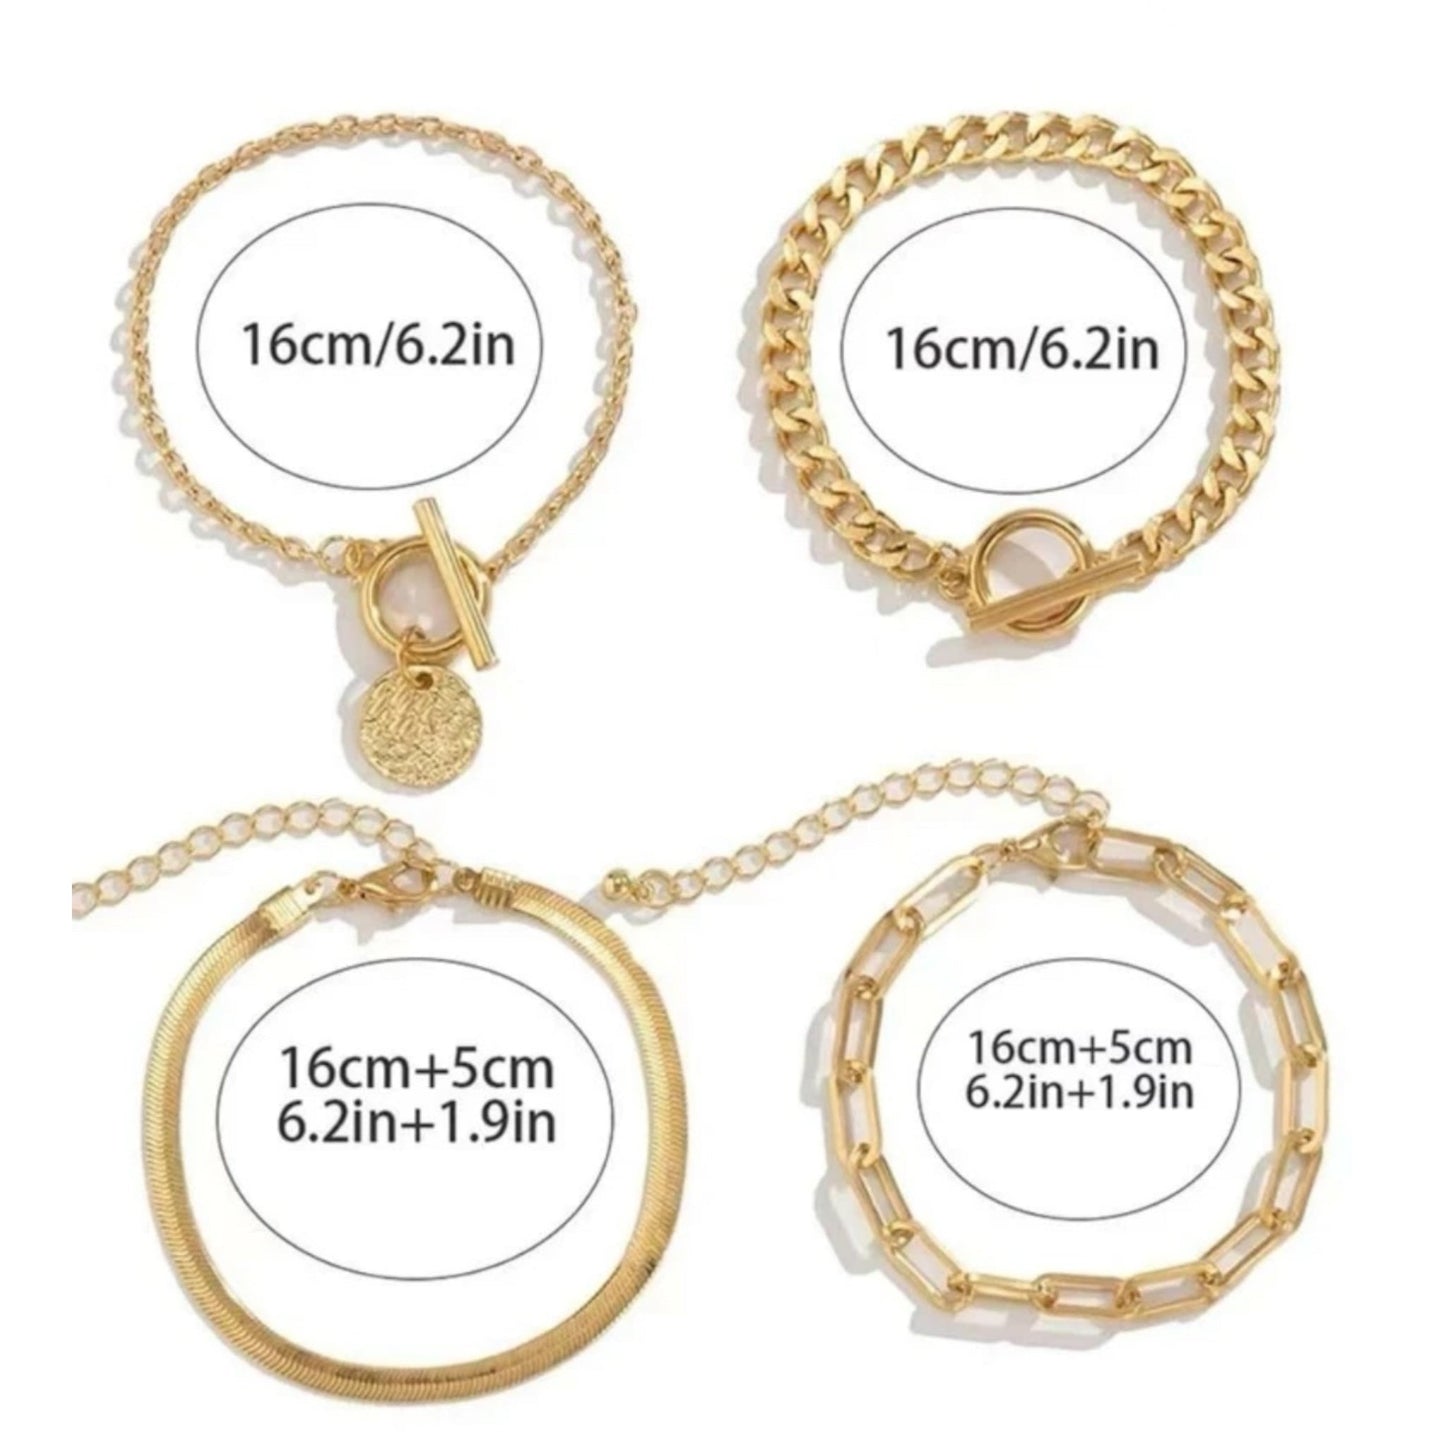 Boho-Chic Bracelets Set of 4 Pieces In Gold